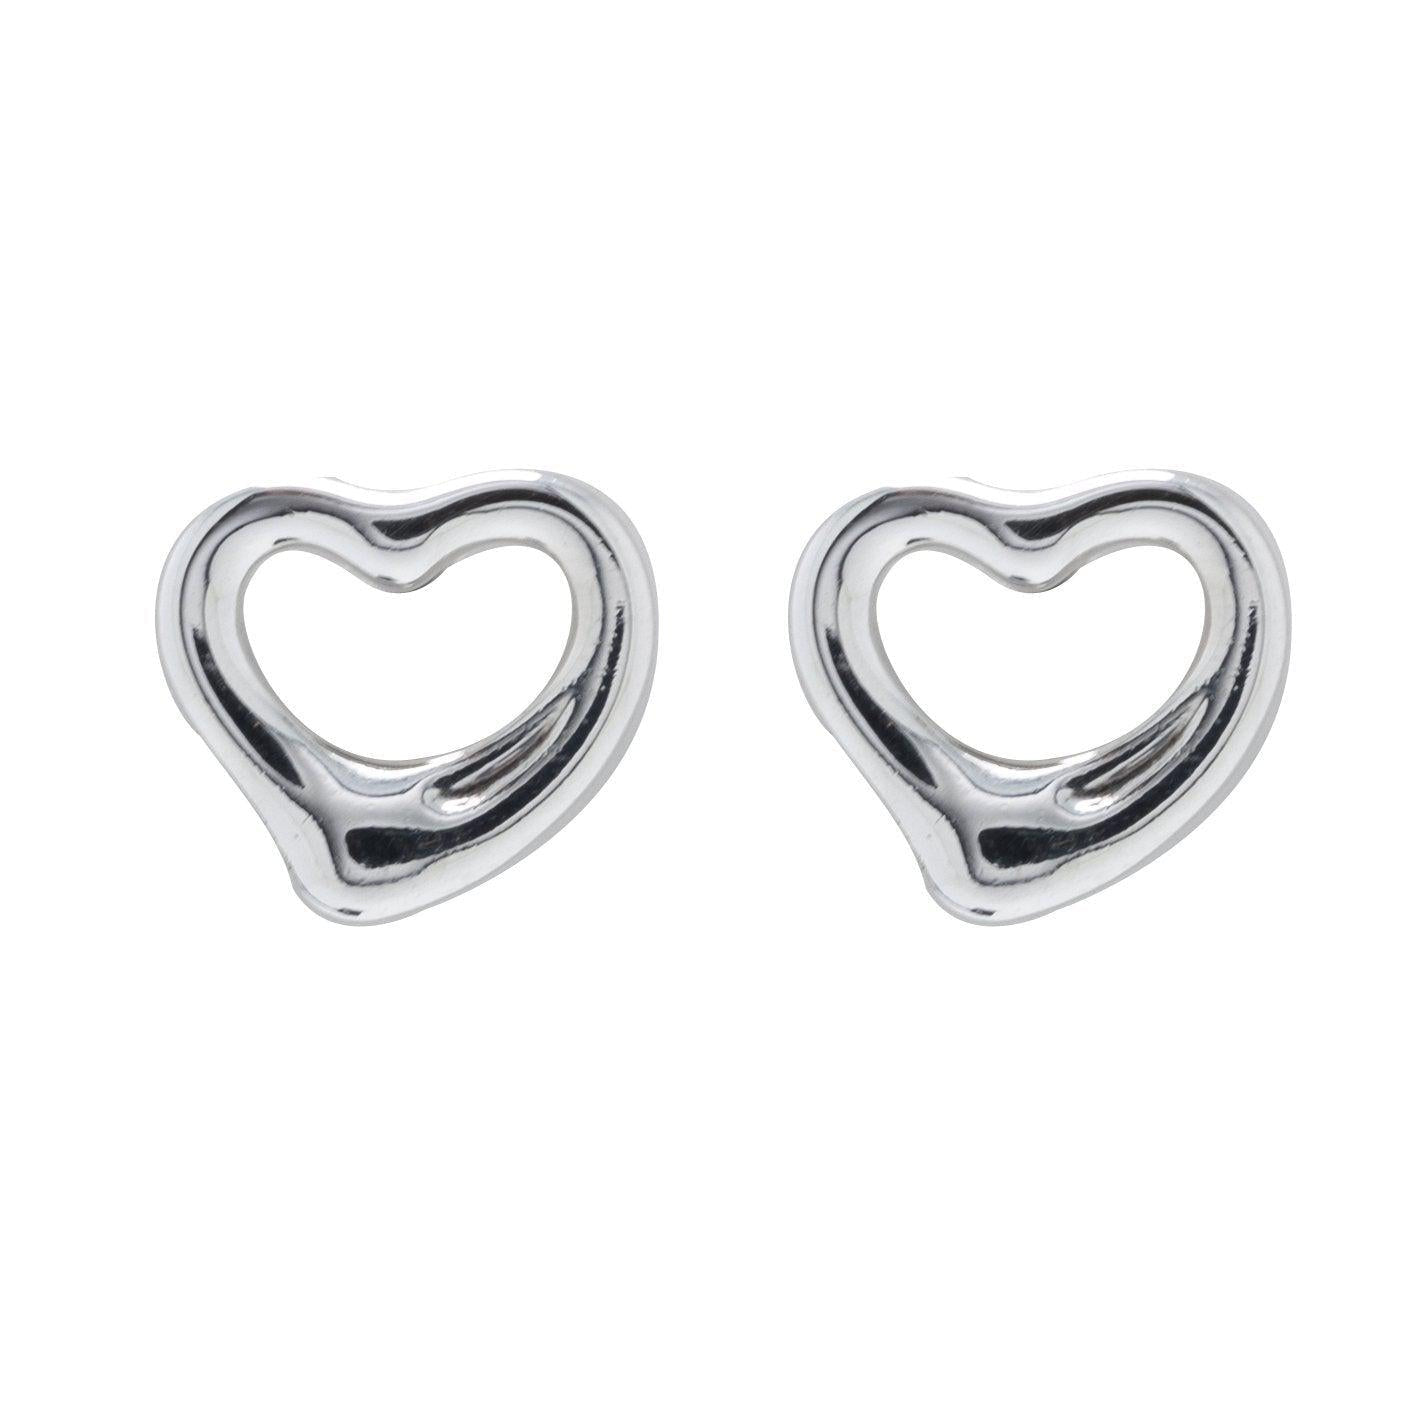 1pc Simple Uncommon Design Heart Shaped Earring Suitable For Women's Daily  Wear | SHEIN